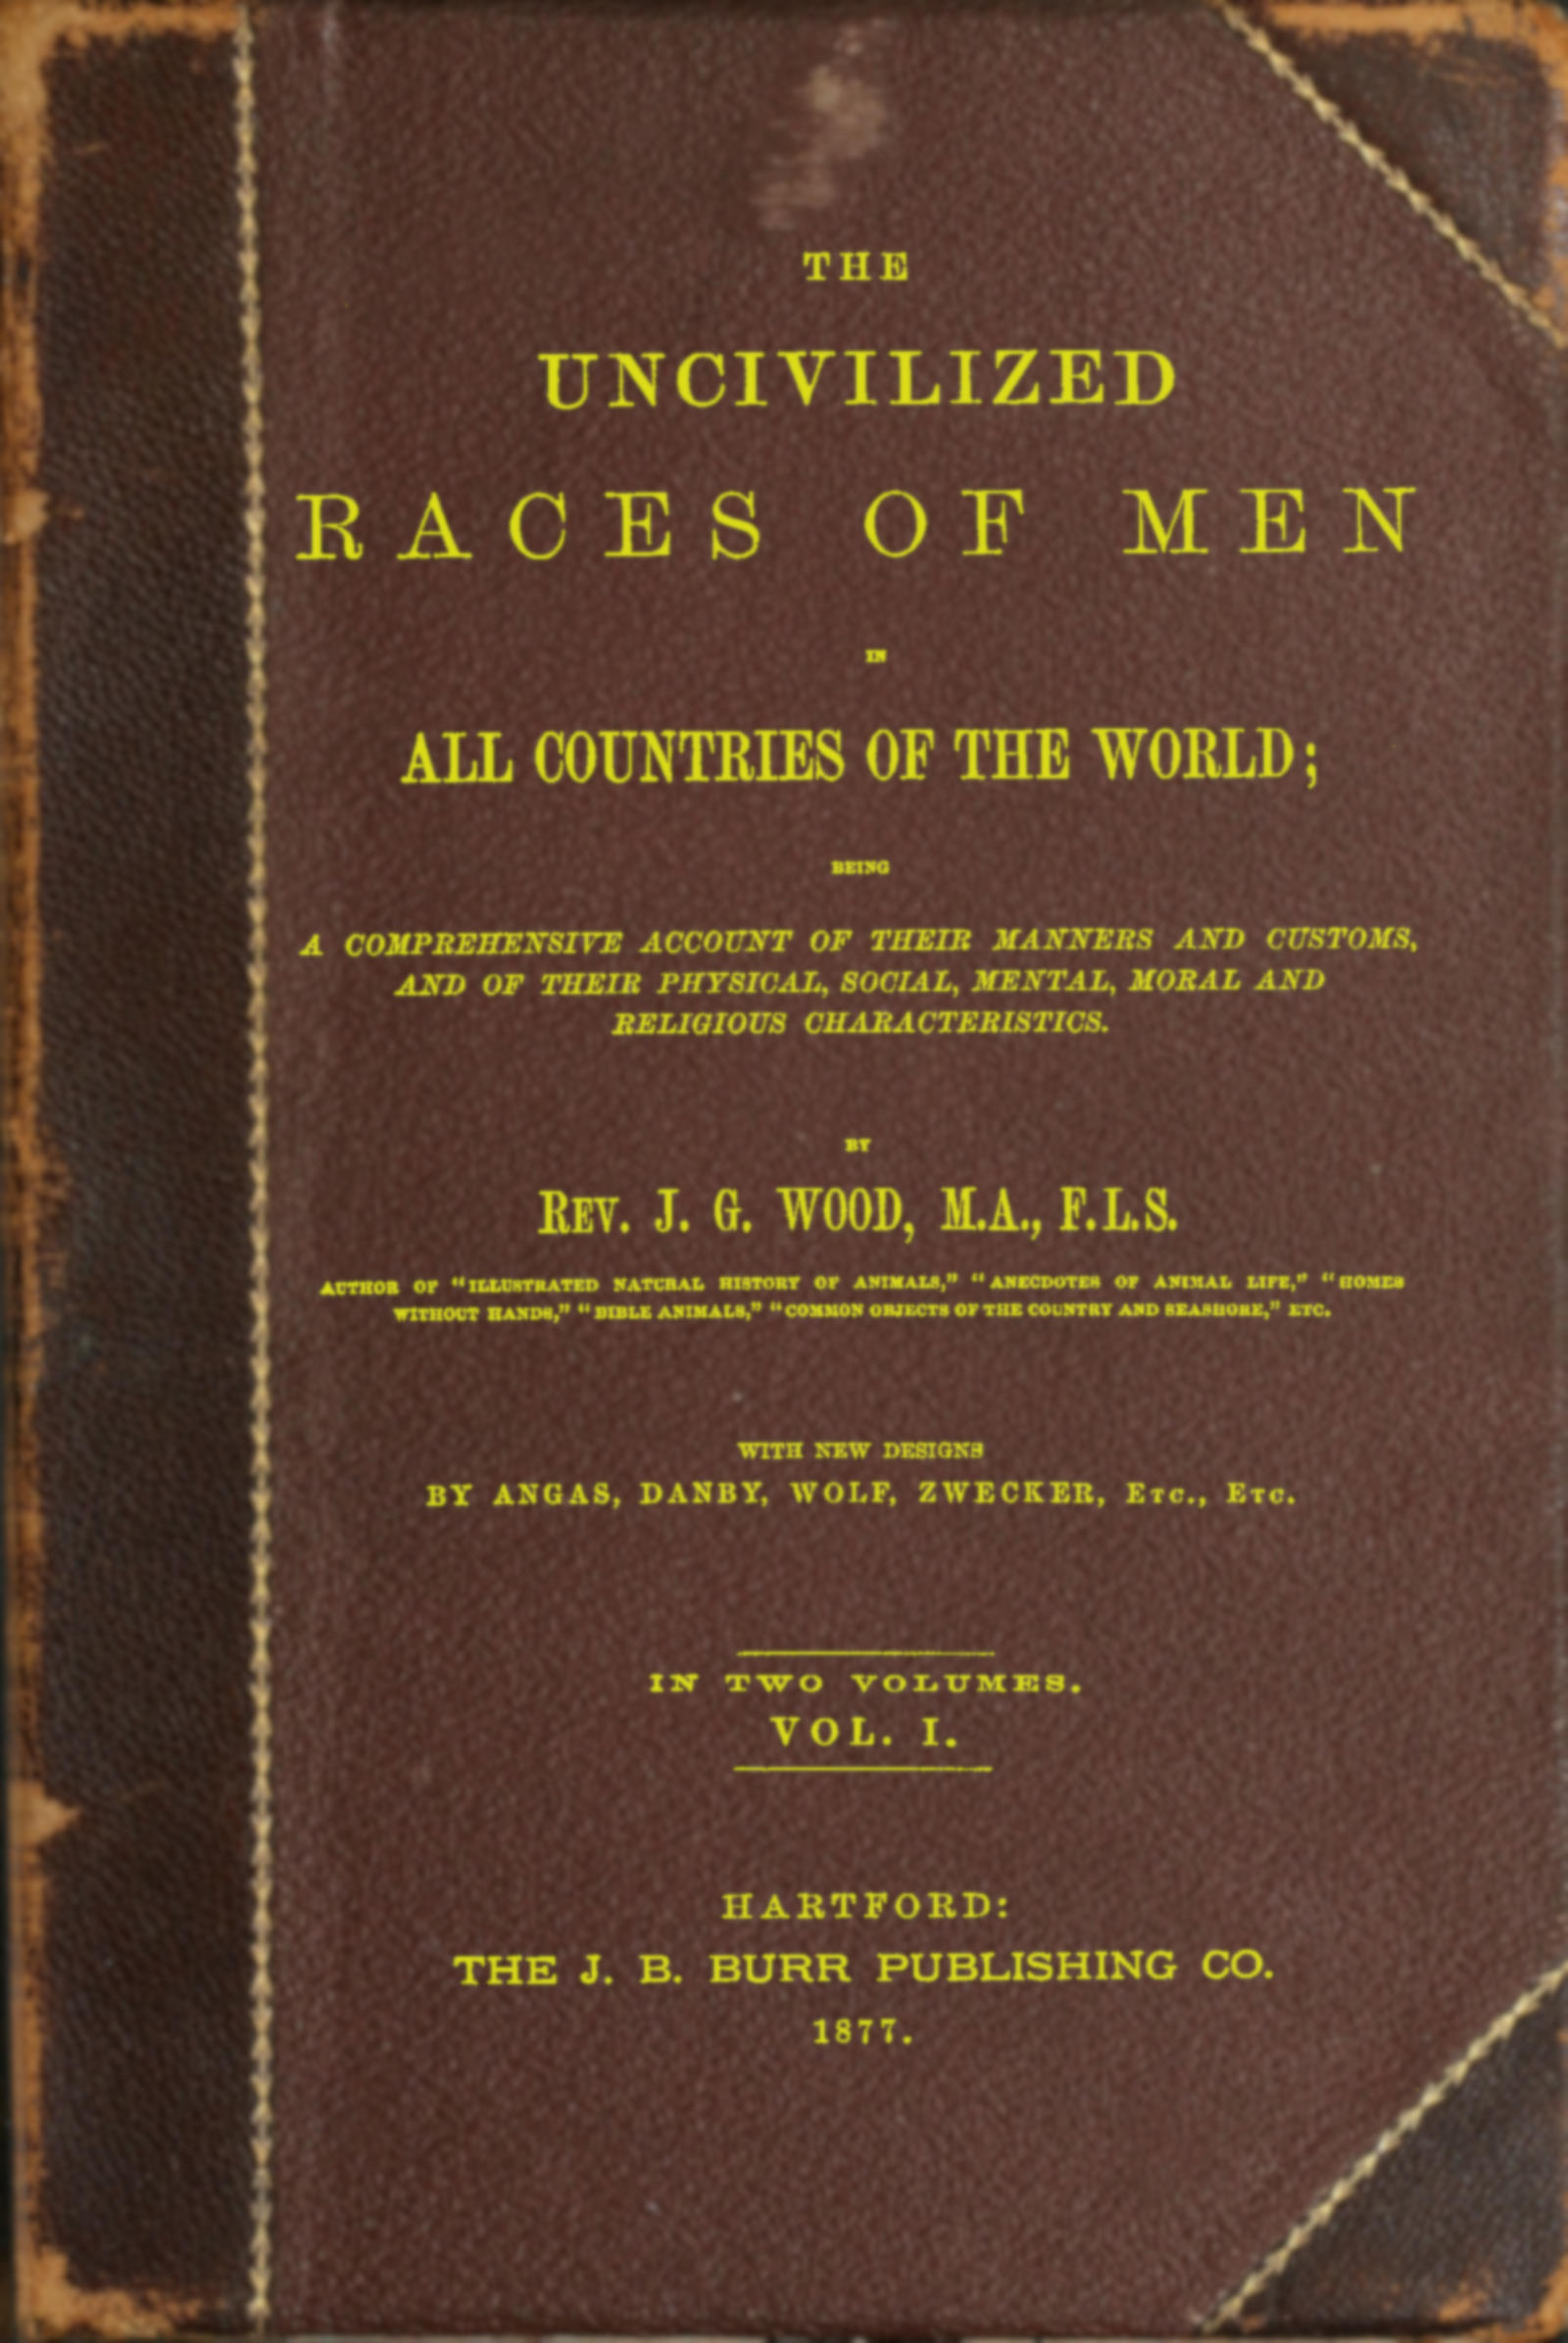 The Uncivilized Races of Men in all Countries of the World Vol. I, by Rev.  J. G. Wood—a Project Gutenberg e-book